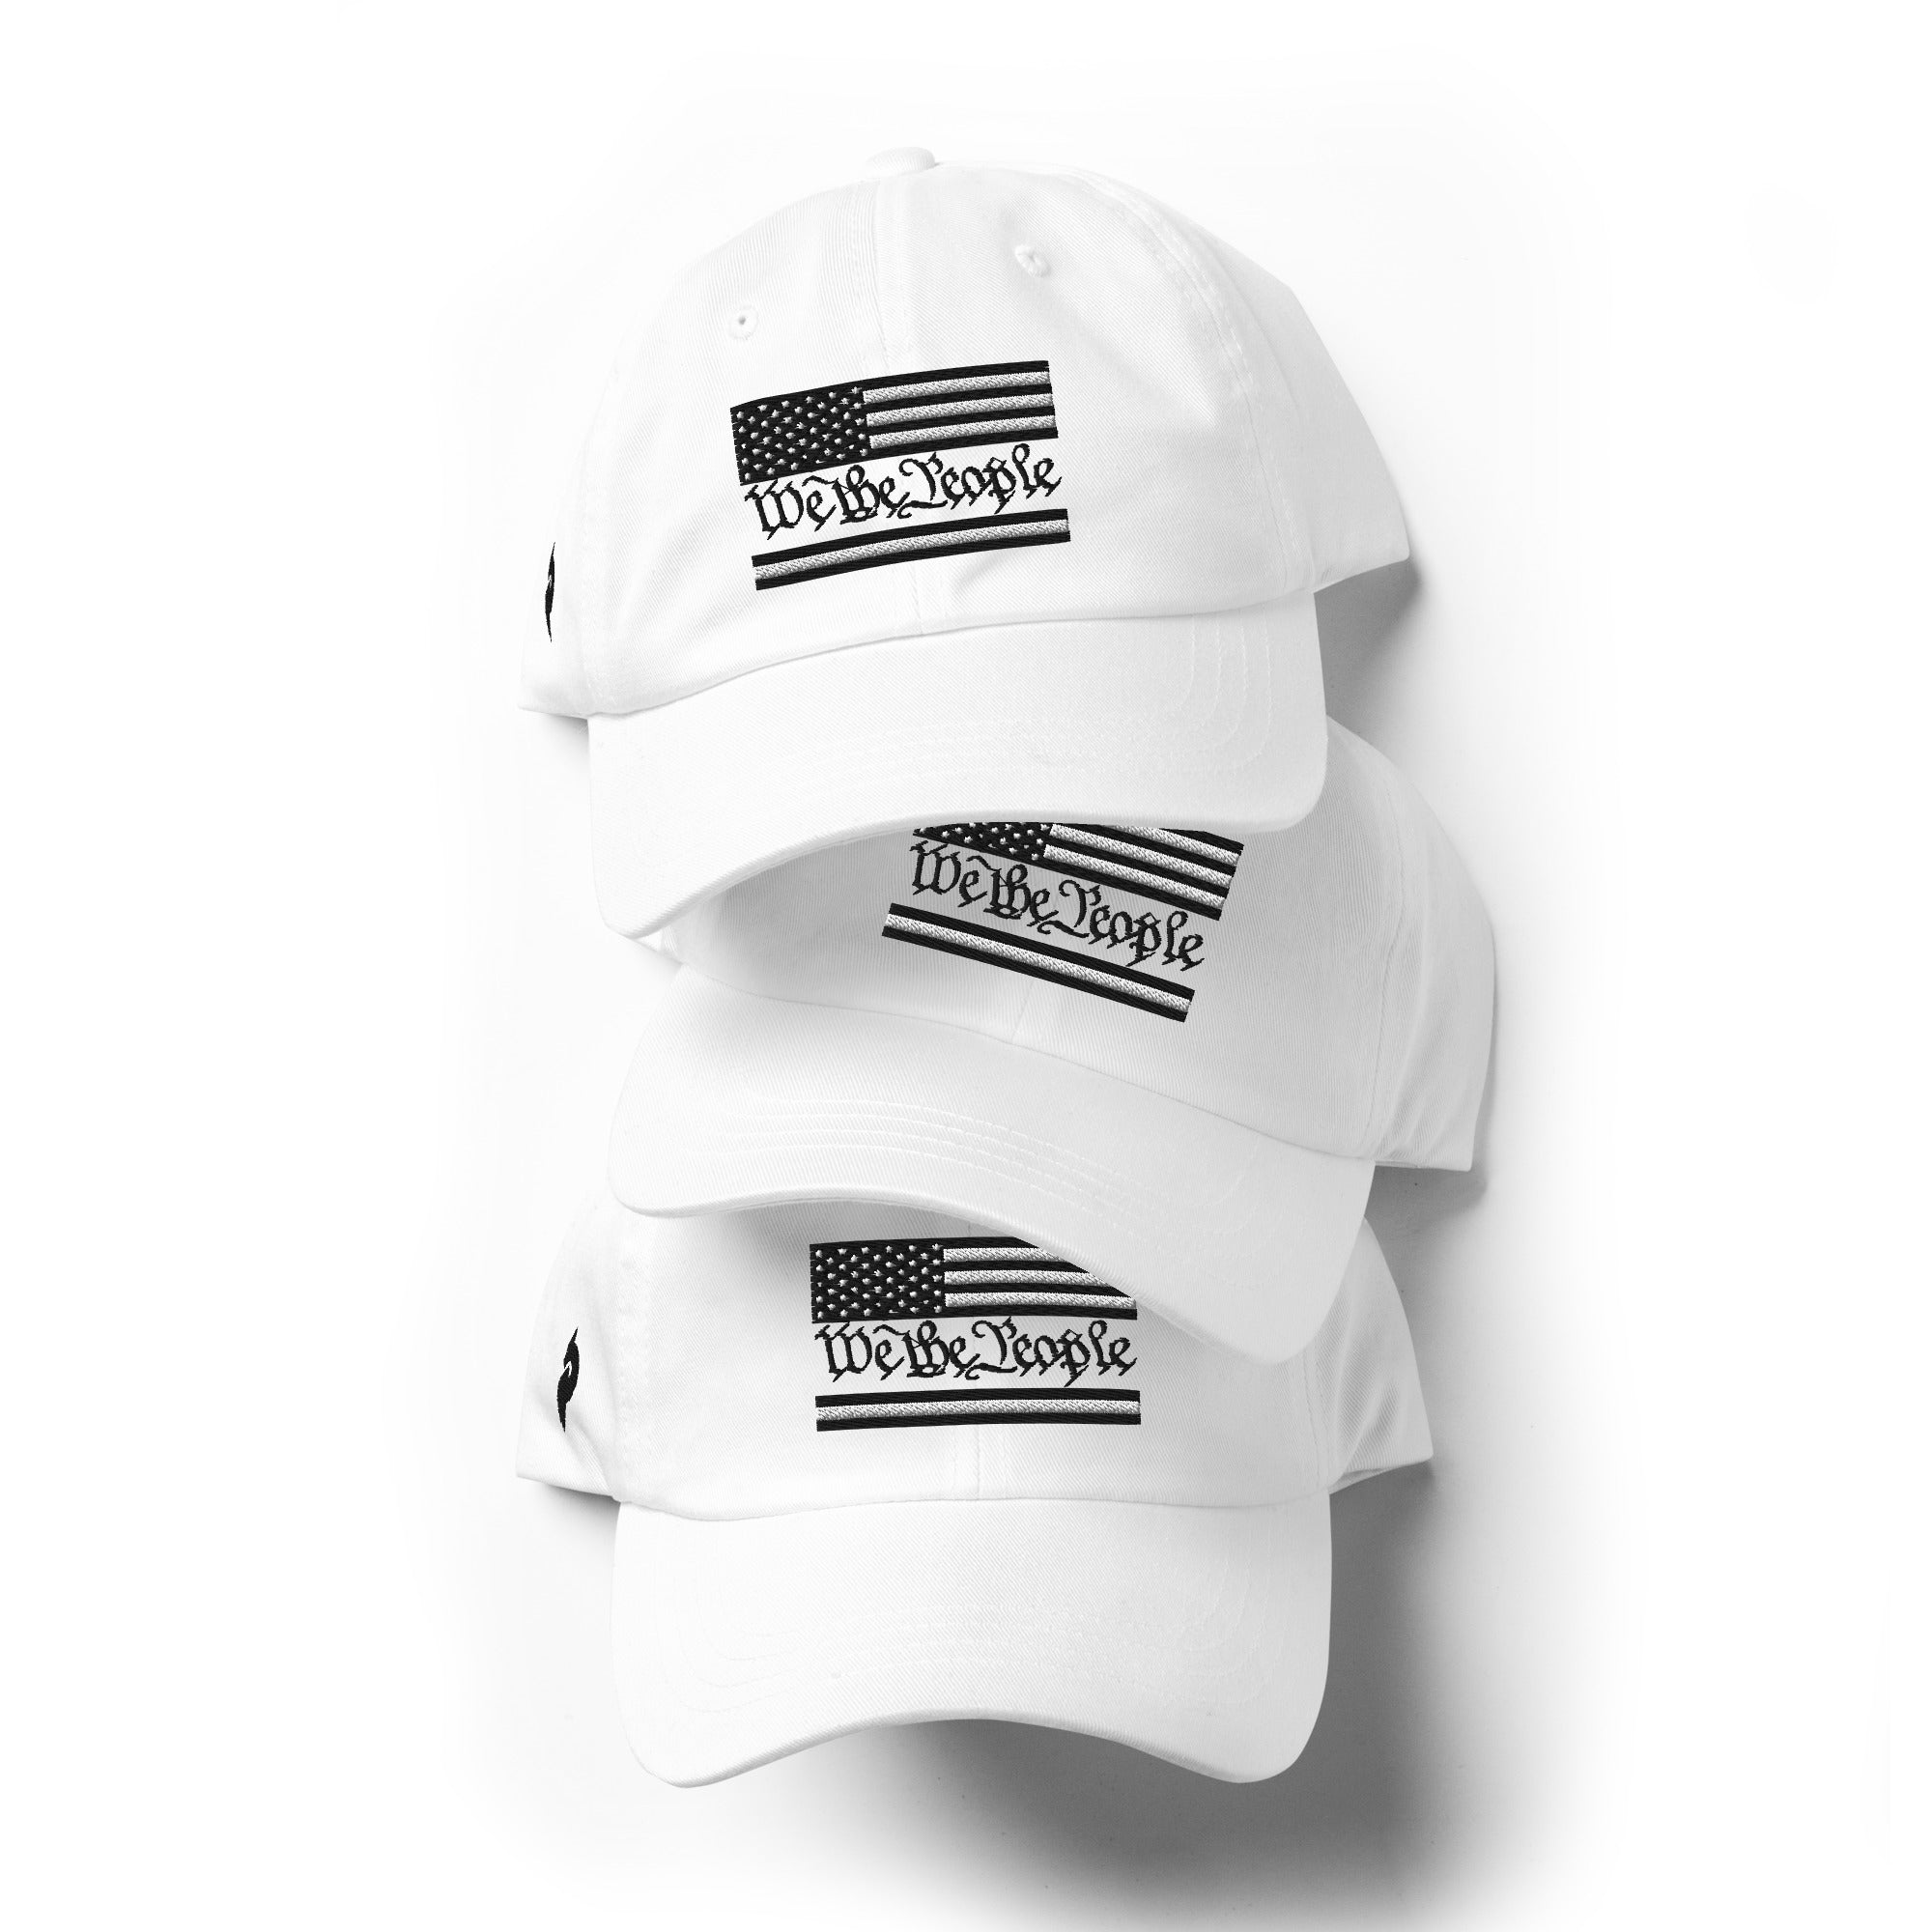 We The People - USA Flag - White and Black - White Dad Hat - We The People - USA Flag - White and Black - White Dad Hat - DRAGON FOXX™ - 9639136_7853 - White - - Accessories - Cap - Dad Hats